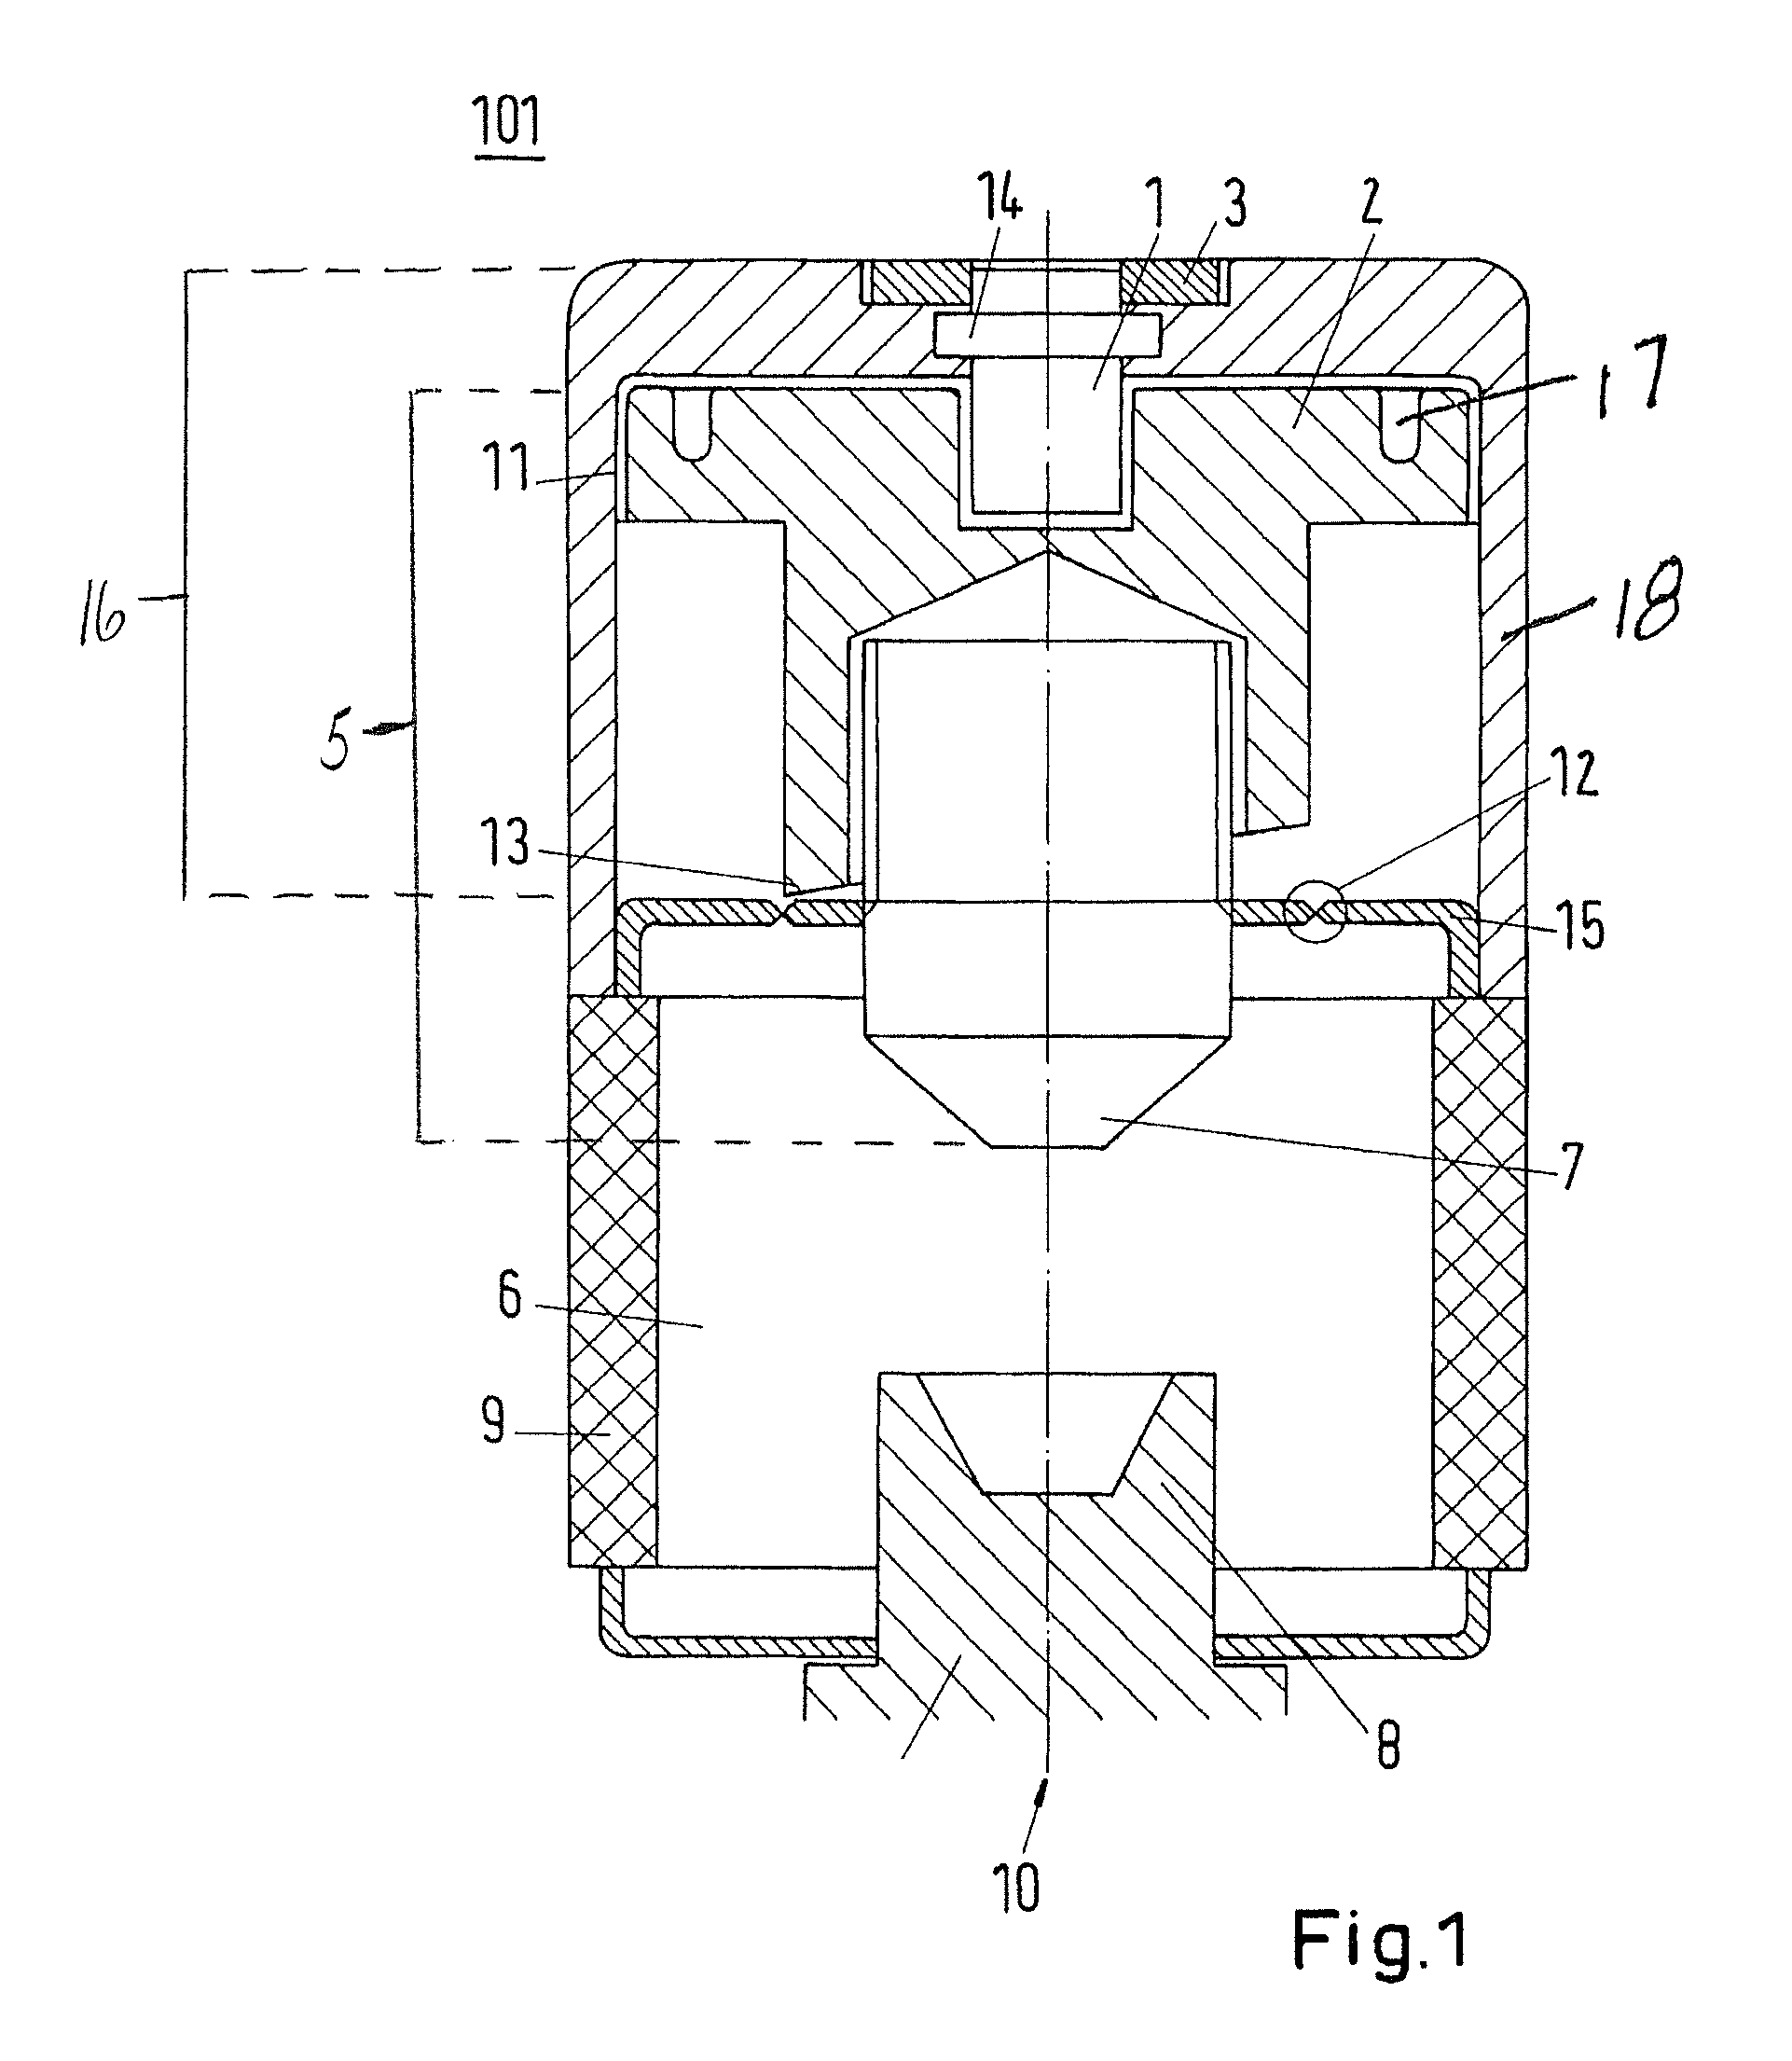 Low-voltage, medium-voltage or high-voltage switchgear assembly having a short-circuiting system